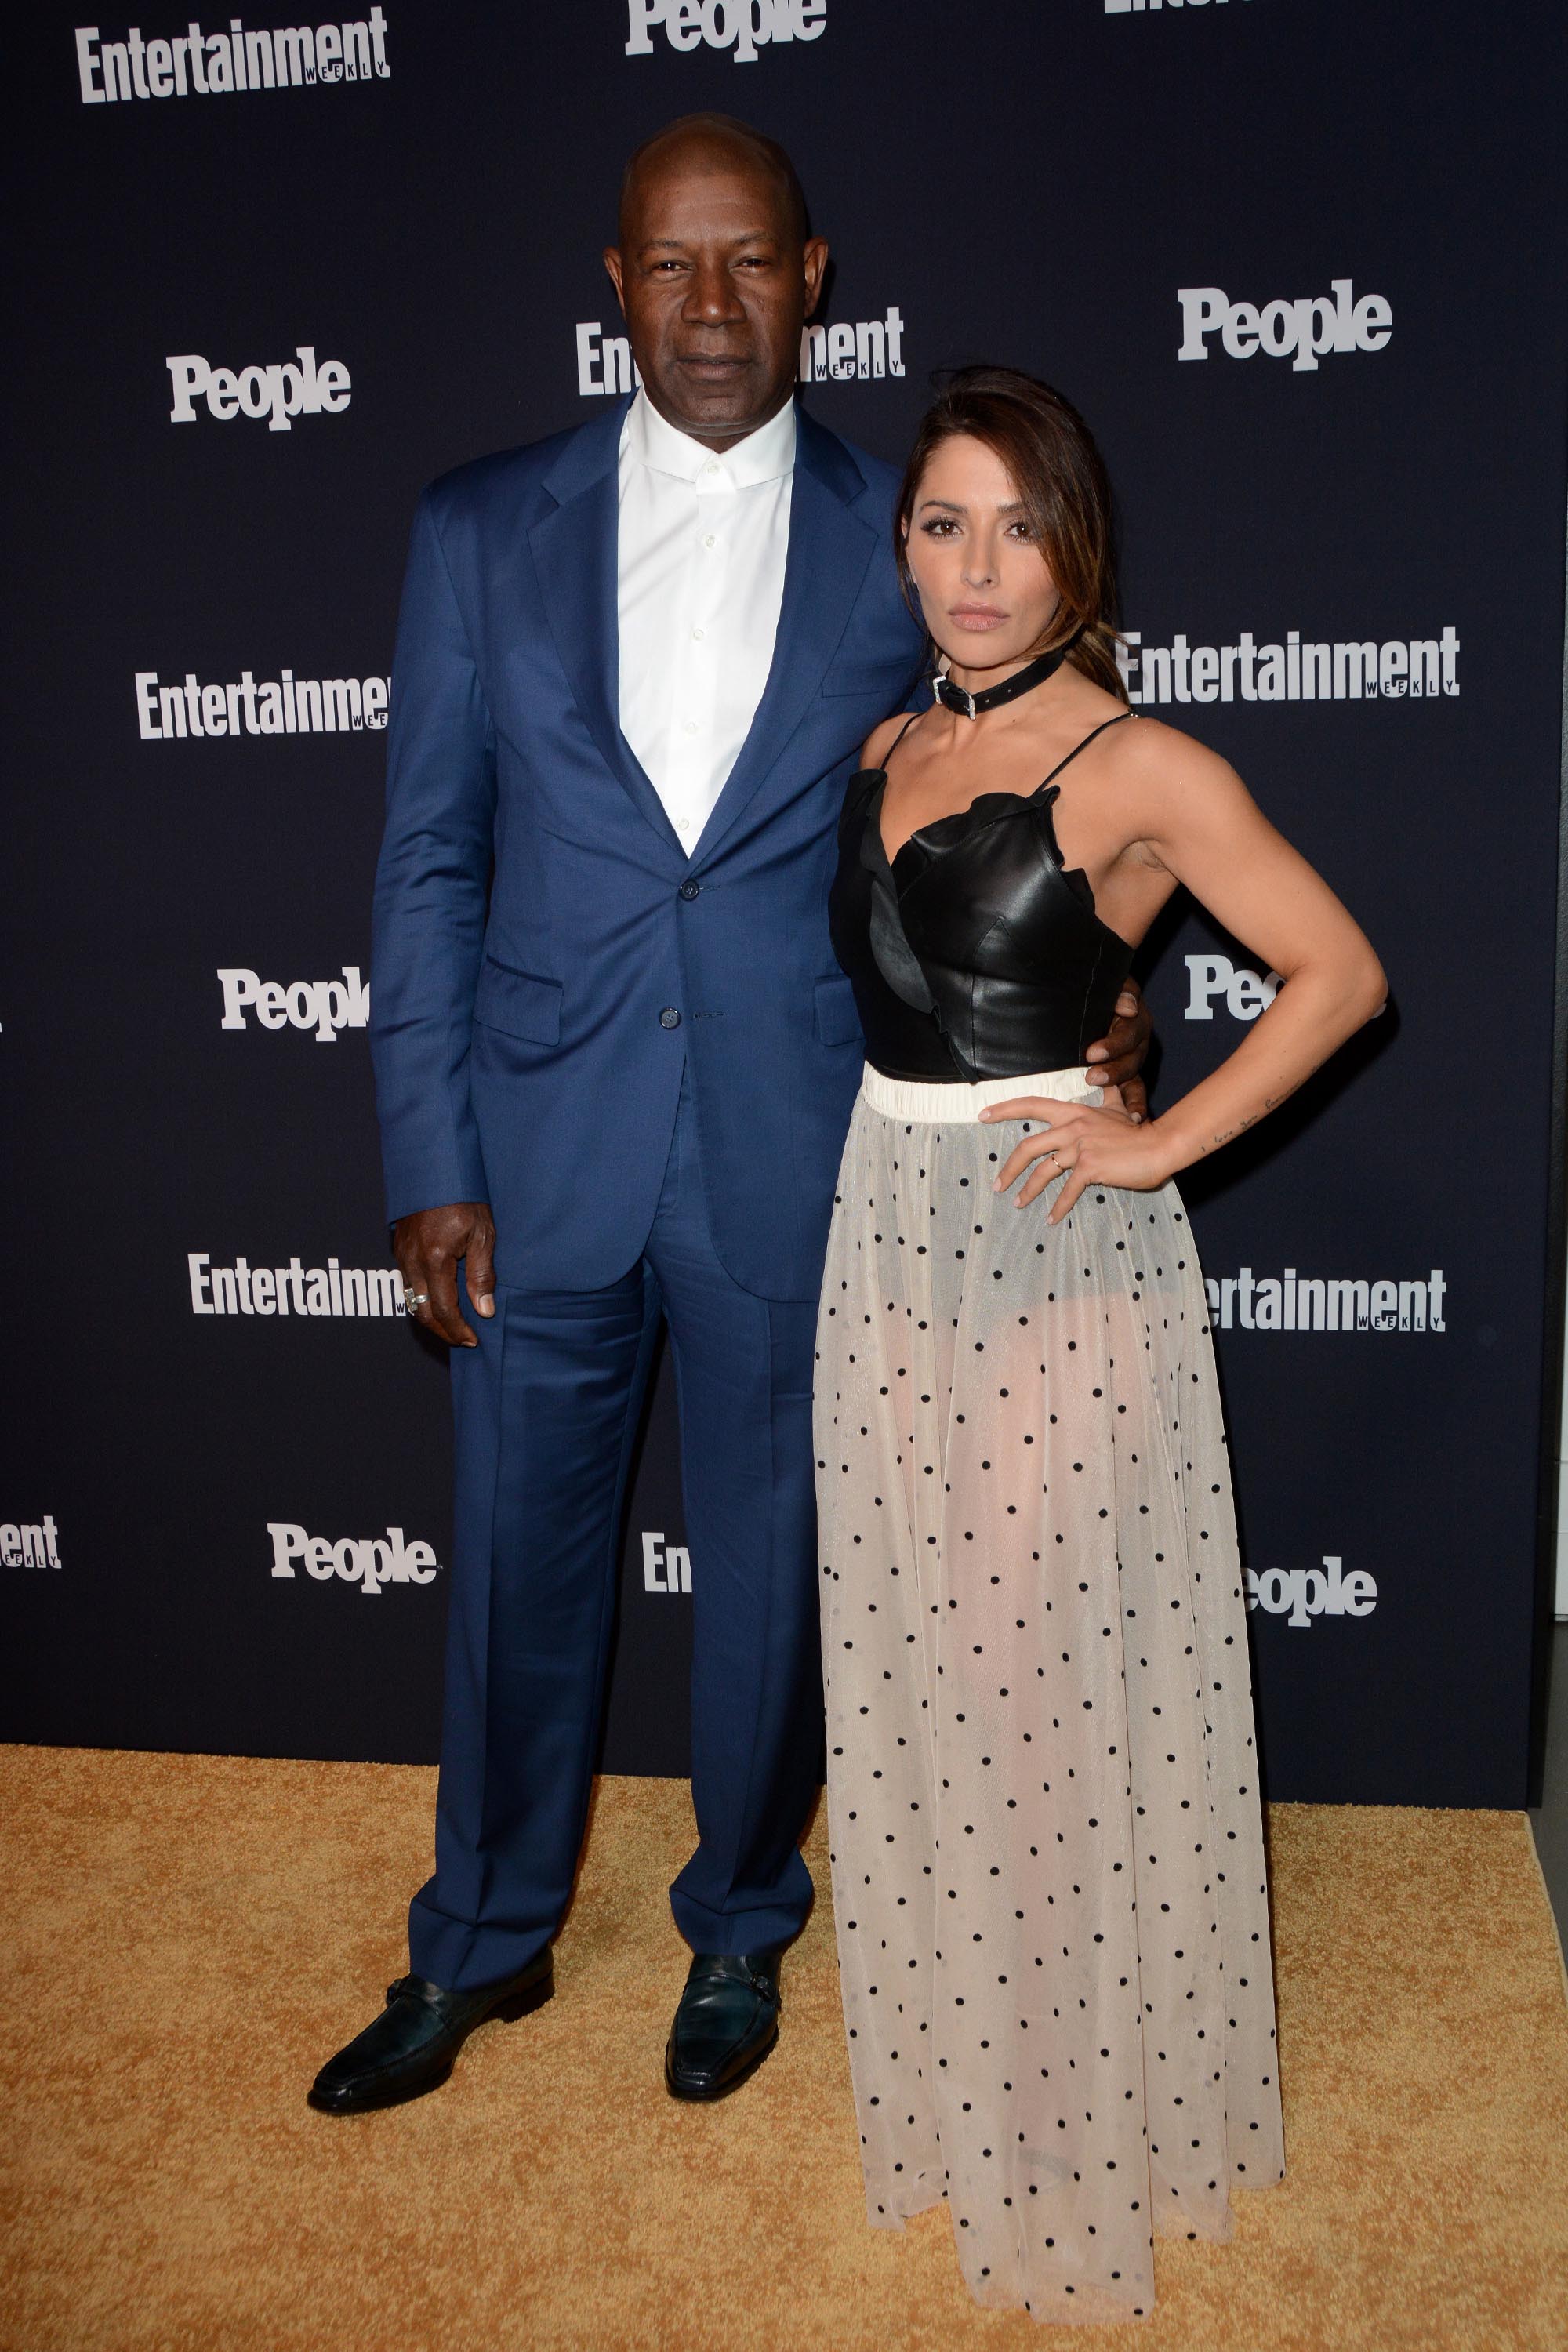 Sarah Shahi attends the Entertainment Weekly & PEOPLE Upfront Party